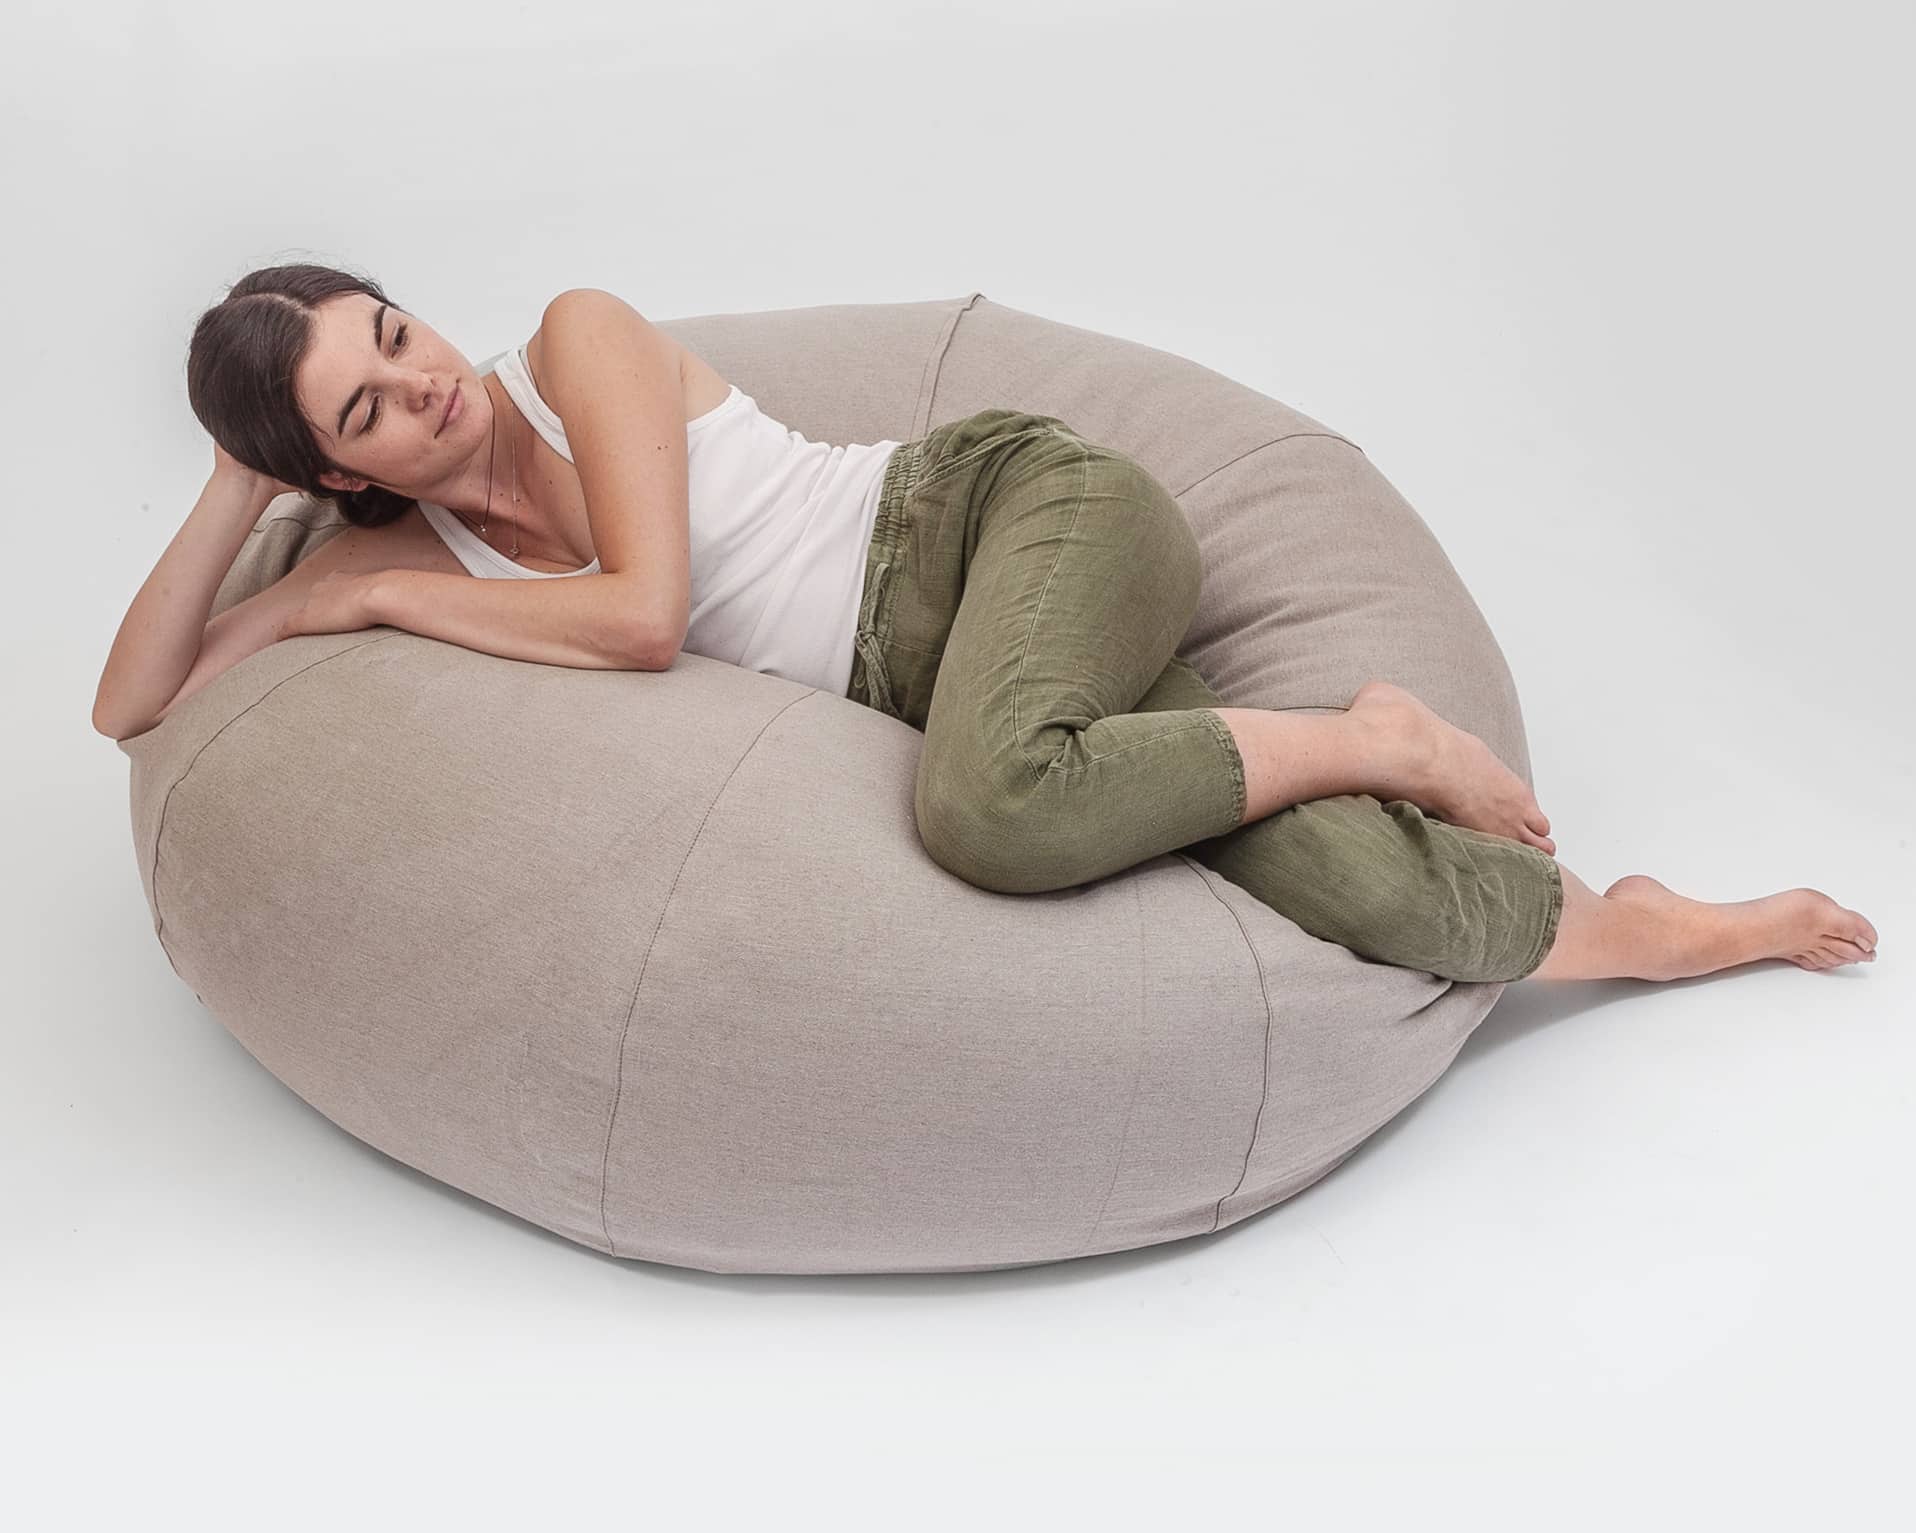 The Coziest Comfy Bean Bag Chair That Everyone Can Love